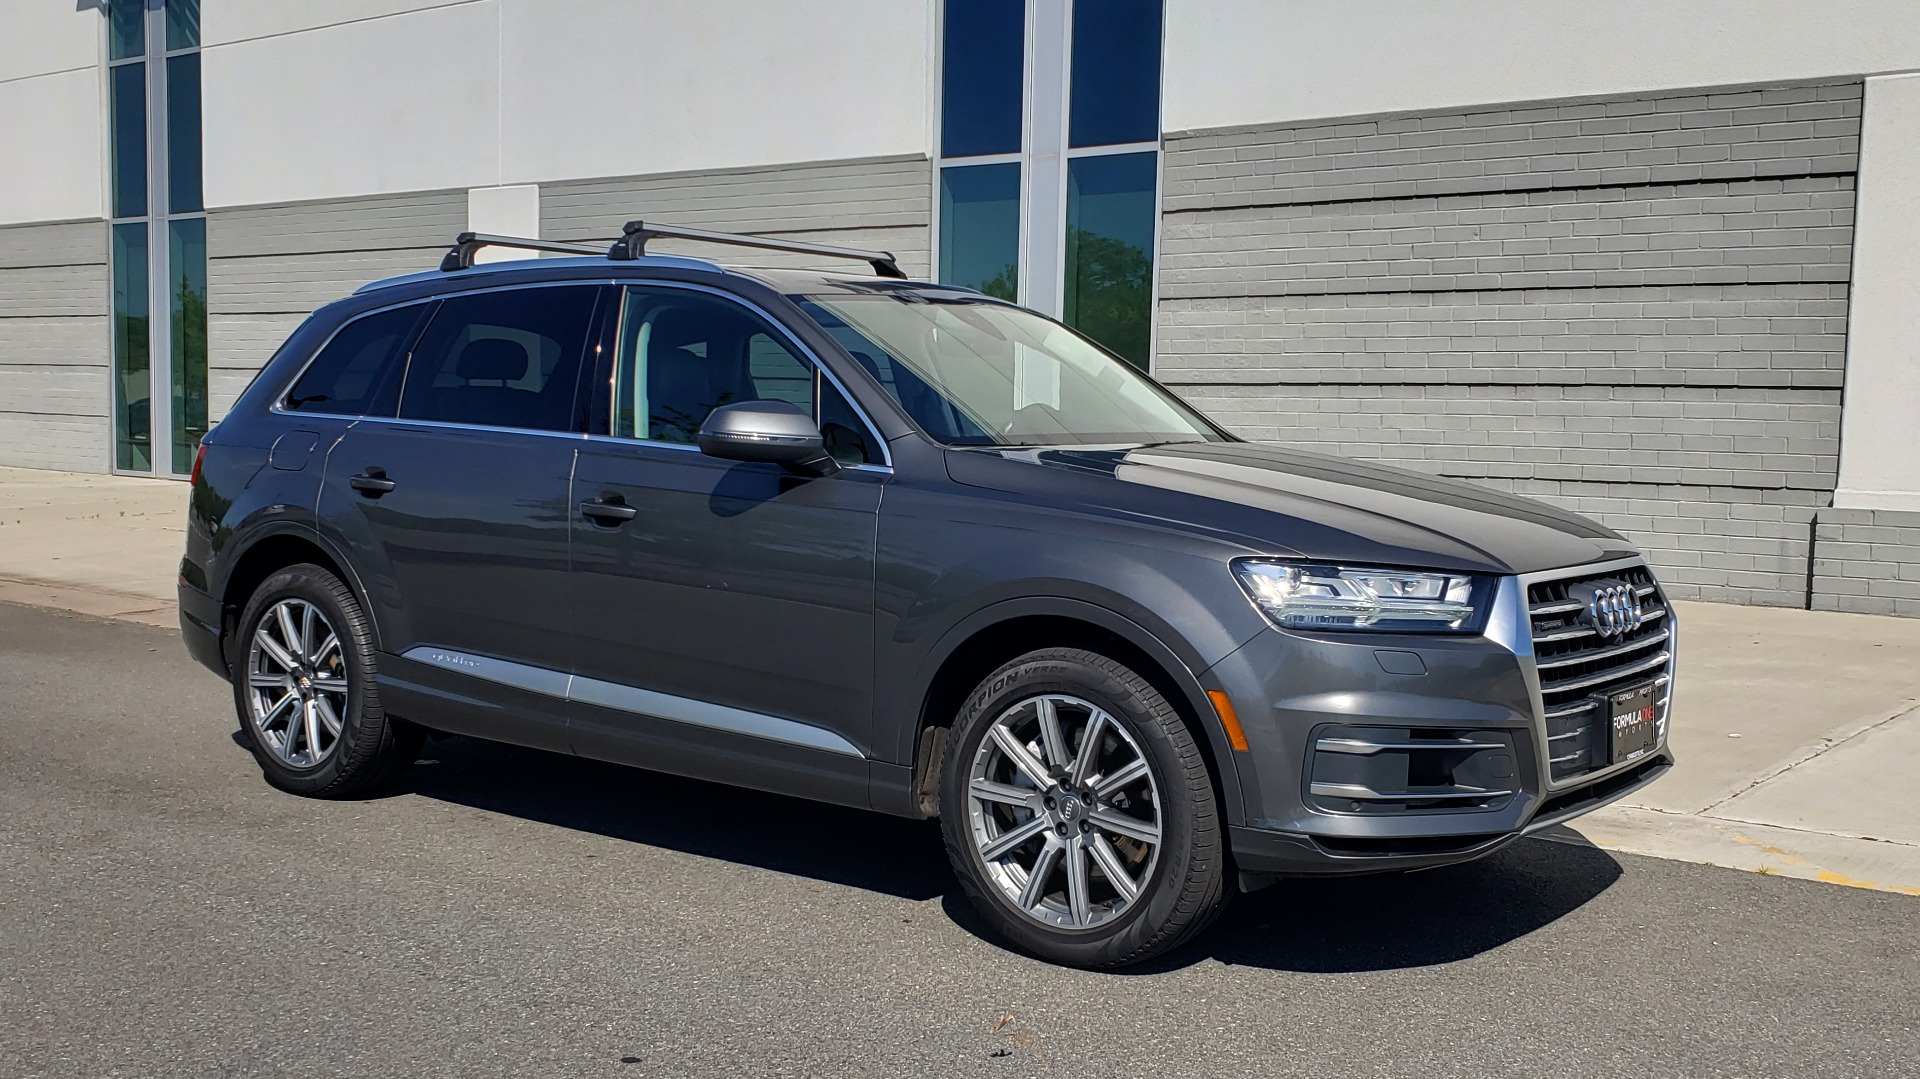 Used 2018 Audi Q7 PREMIUM PLUS TIPTRONIC / NAV / SUNROOF / VISION PKG / CLD WTHR / REARVIEW for sale Sold at Formula Imports in Charlotte NC 28227 6